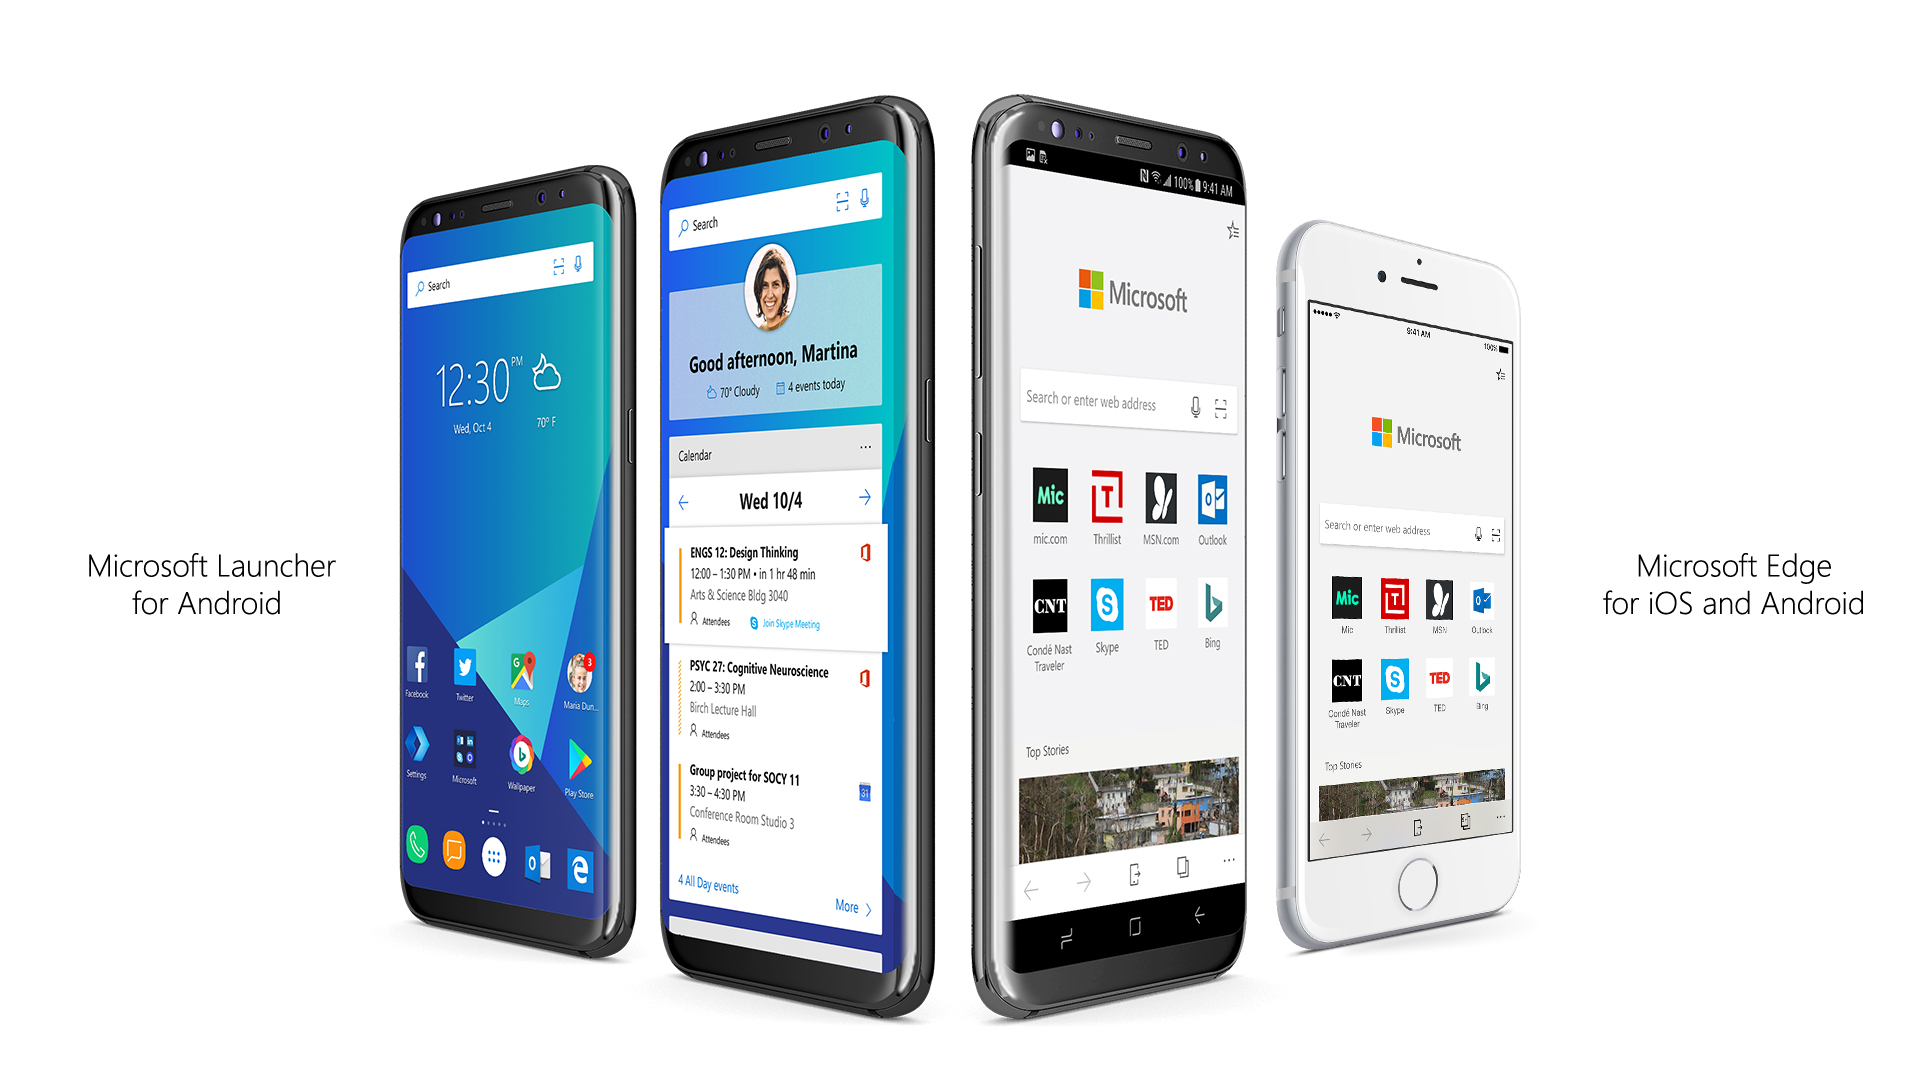 Windows 10 Tip: Timeline for Android phone via Microsoft Launcher app caaf609f6273fcc3e9545708498dcded.jpg